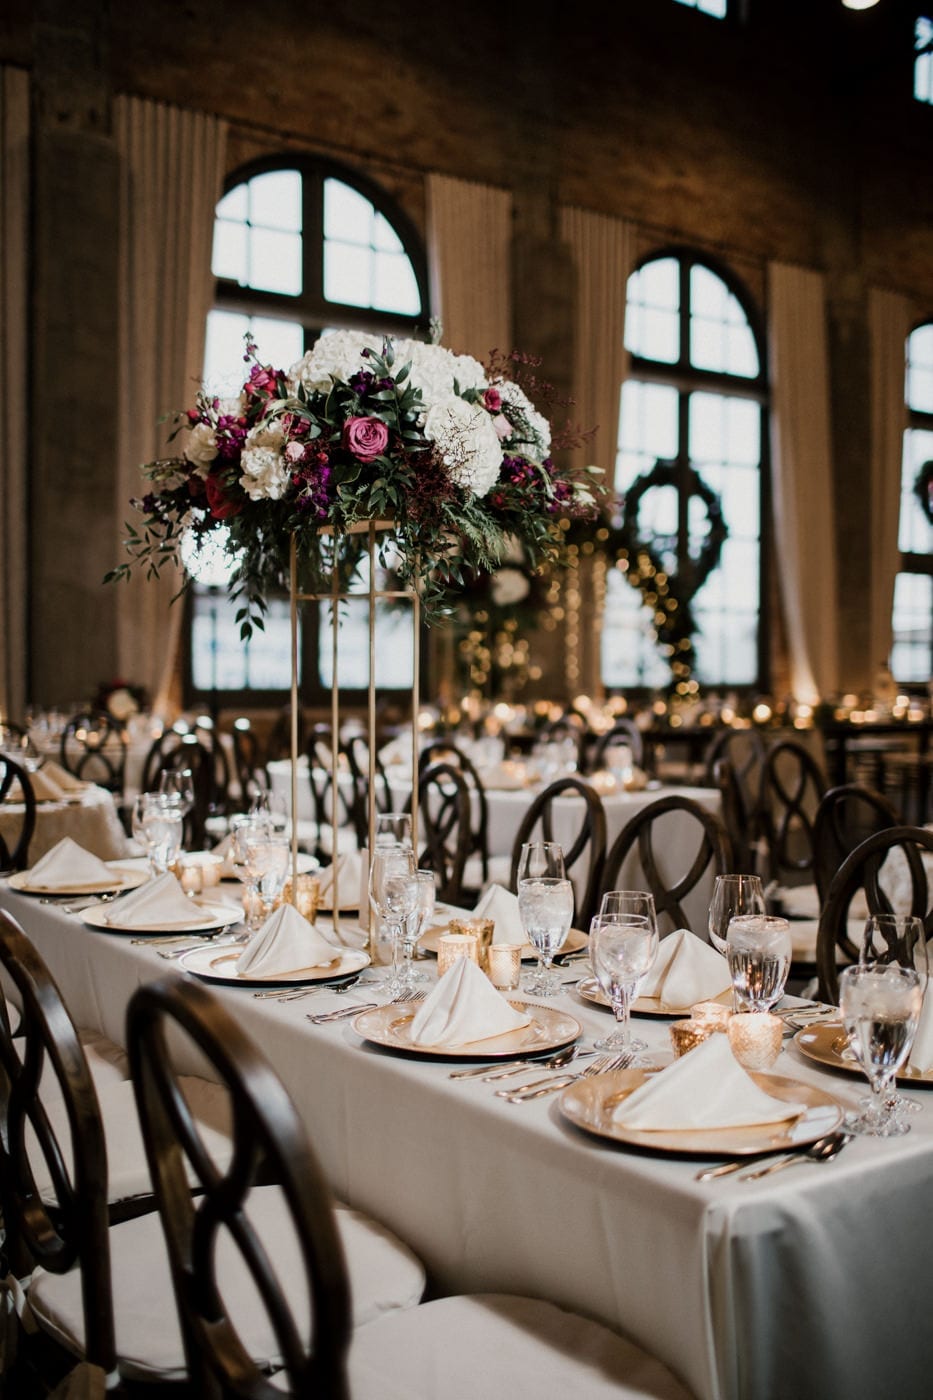 reception tables with floral arrangements at black tie winter wedding